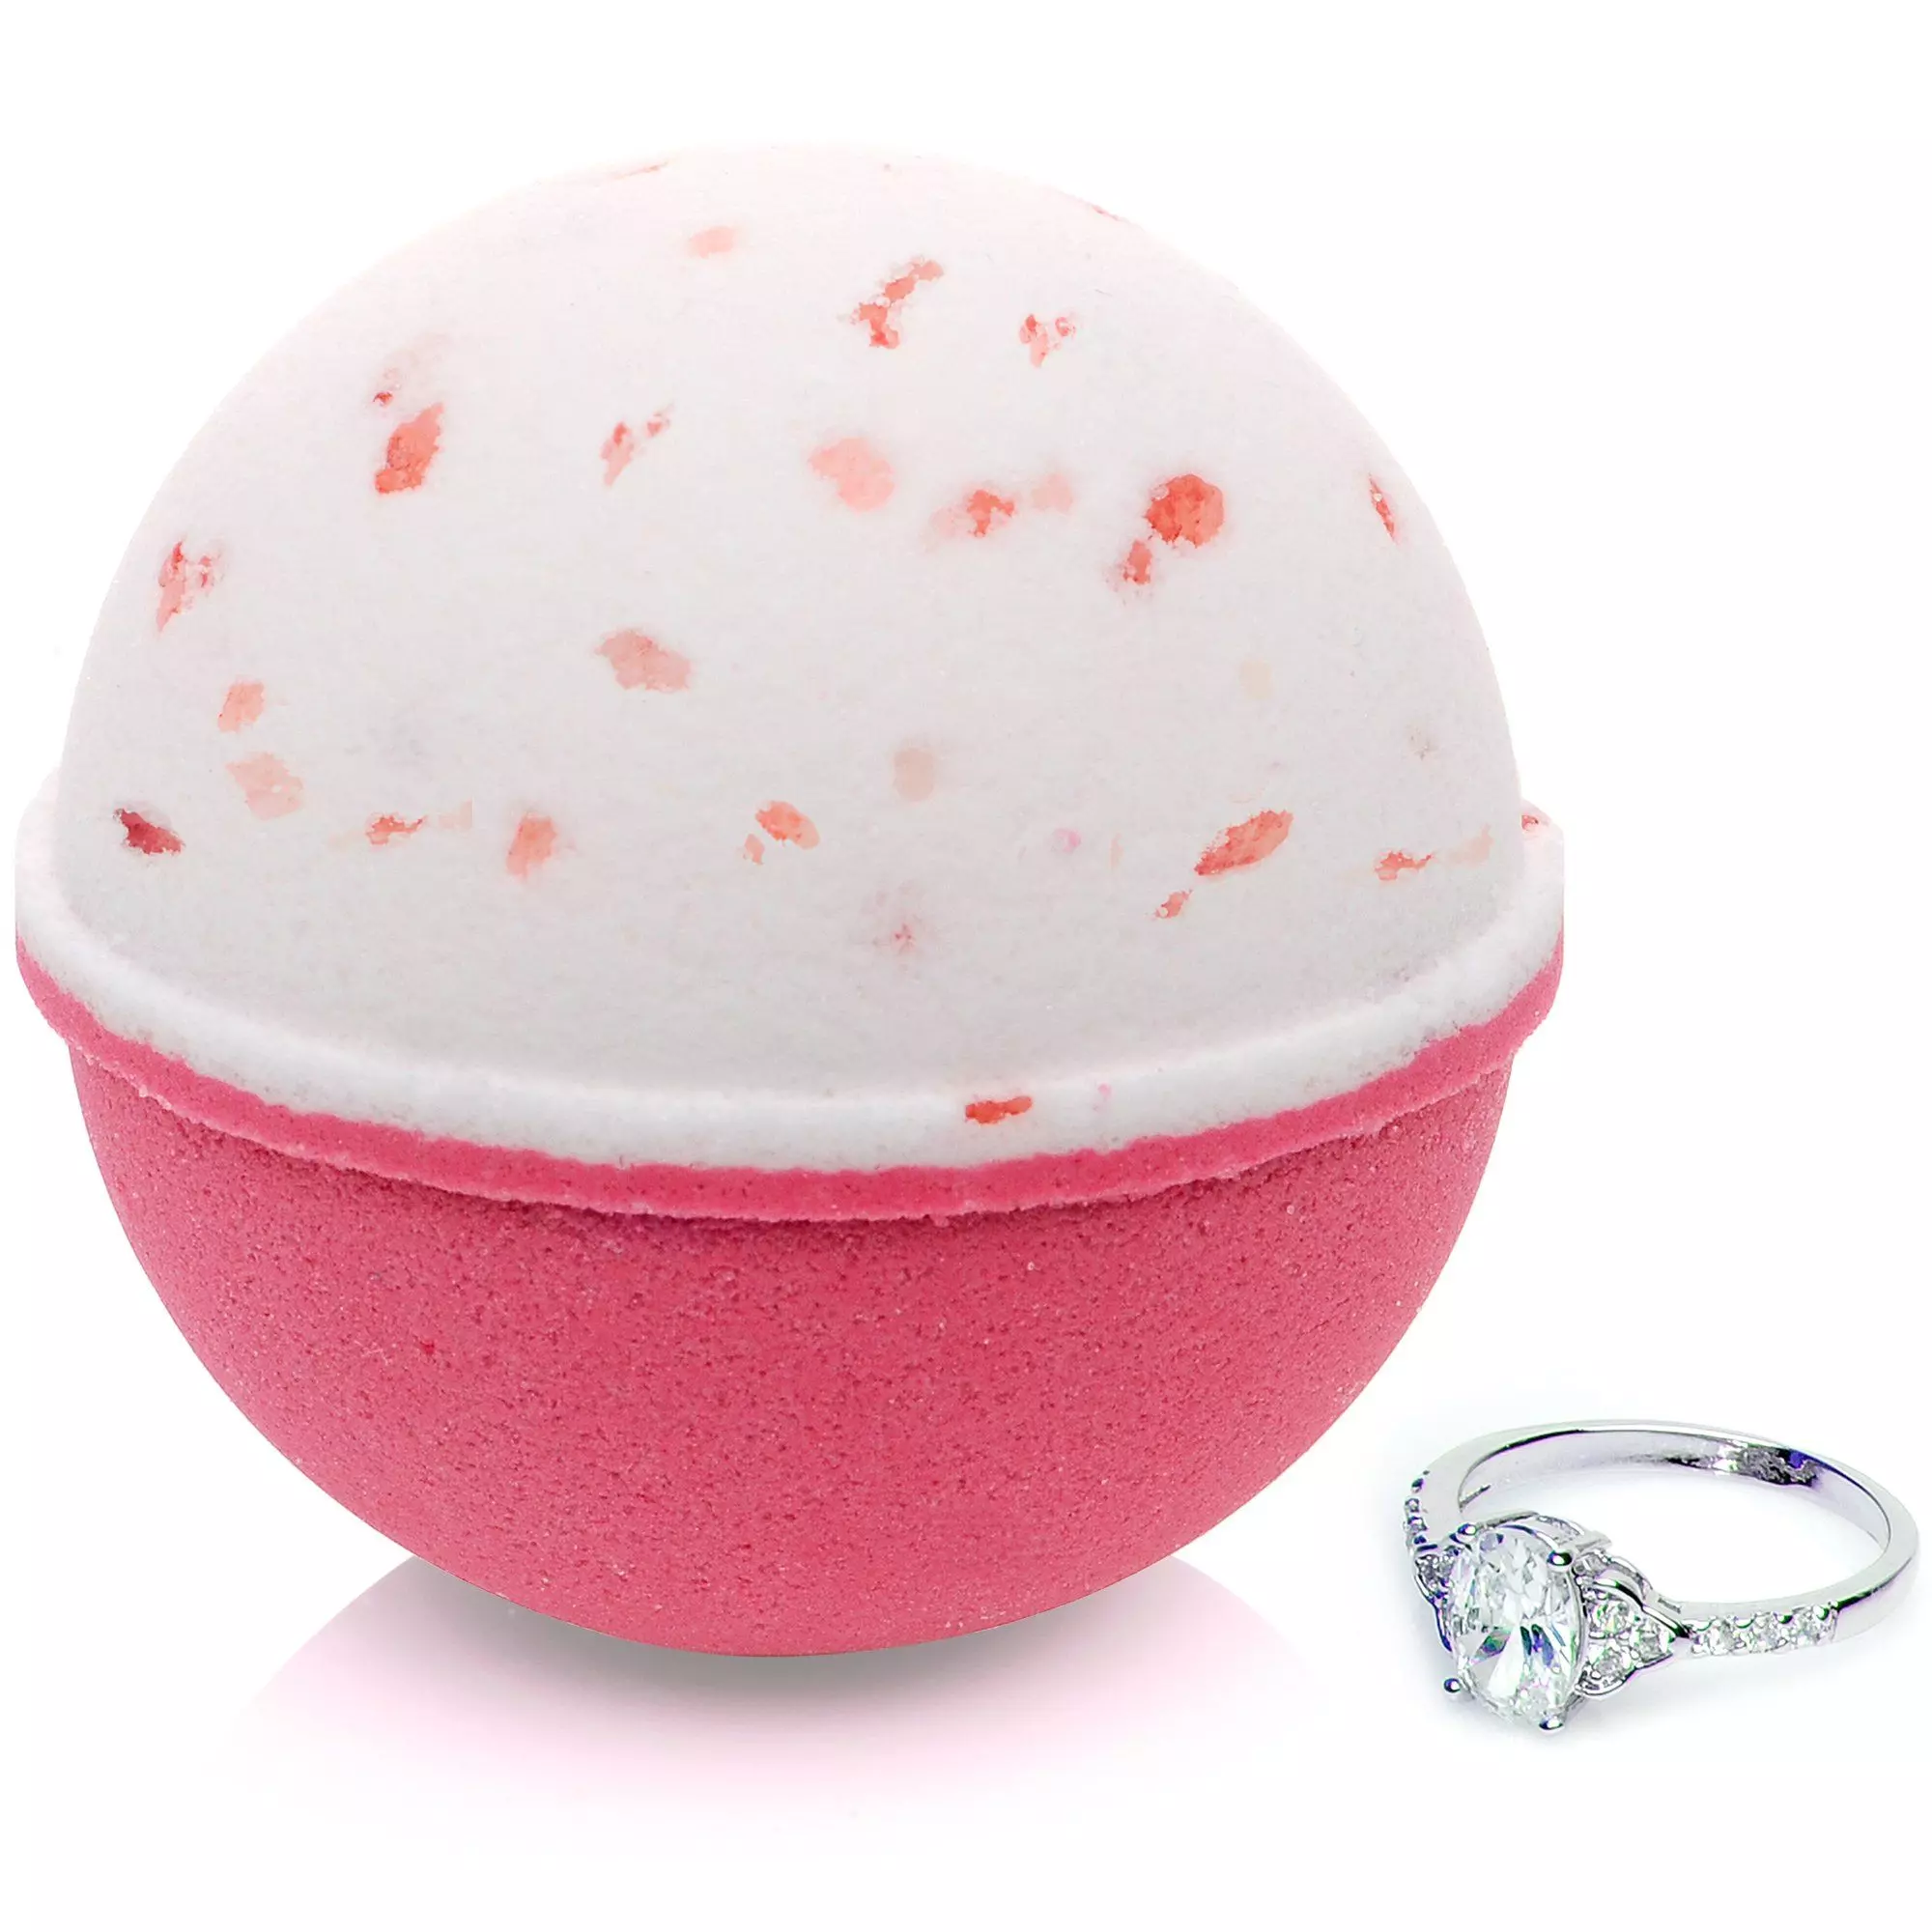 Bath Bomb with Surprise Size Ring Inside